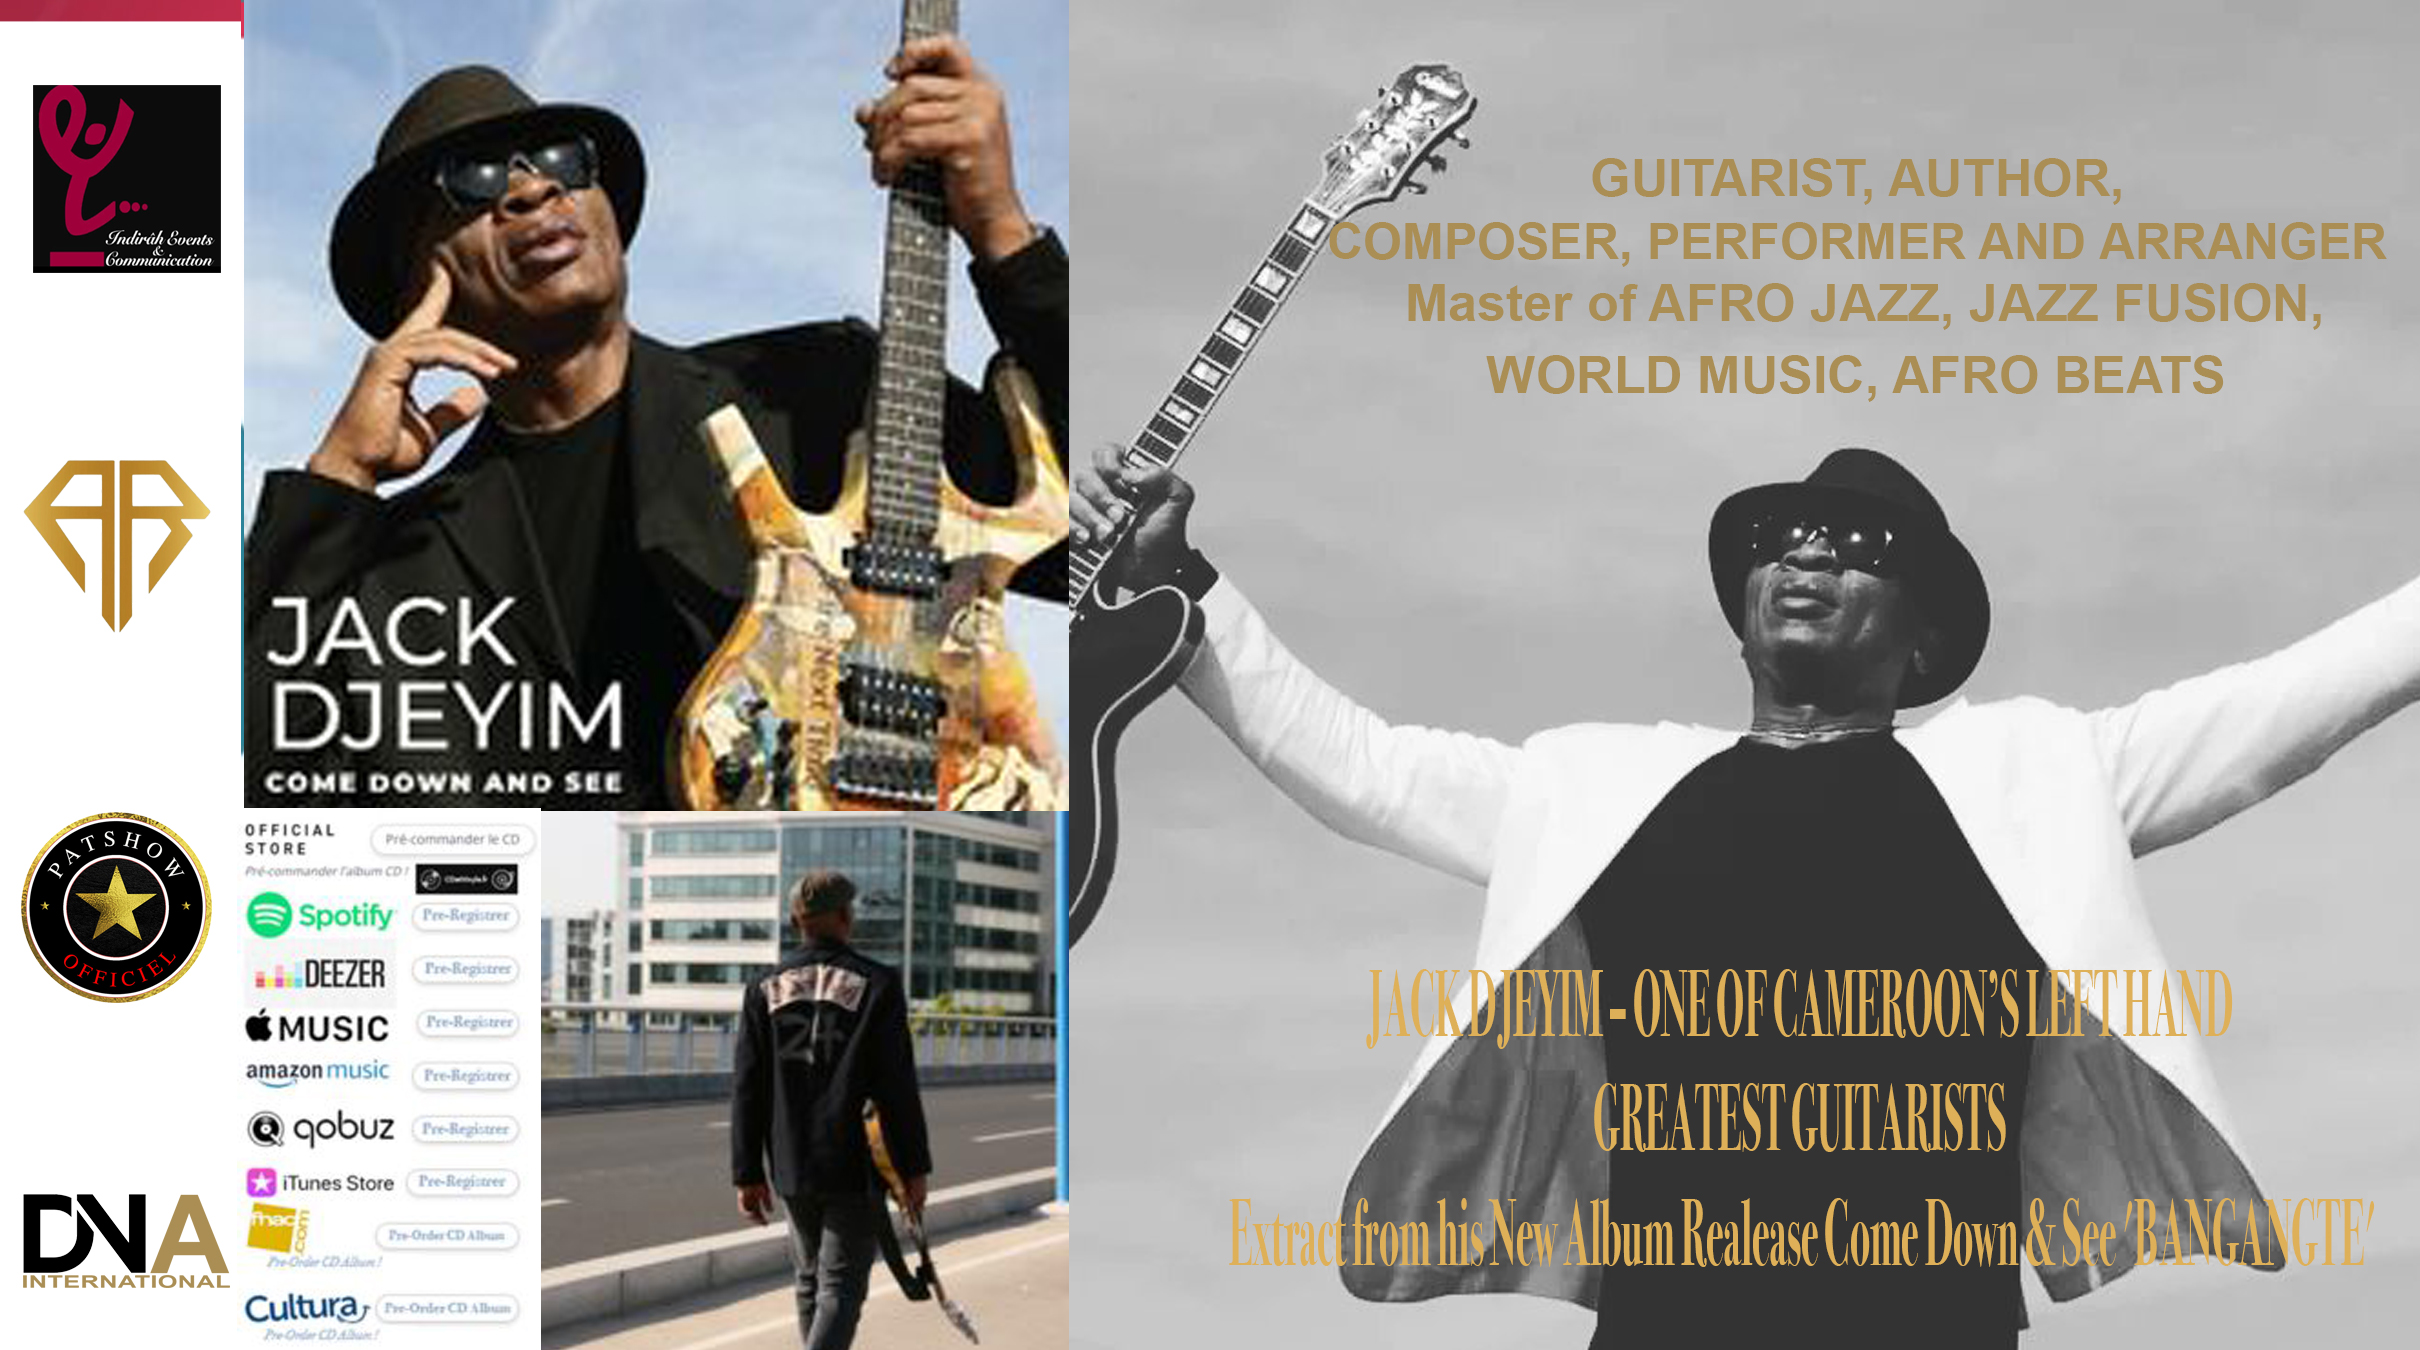 AFRICA-VOGUE-COVER-JACK-DJEYIM-ONE-OF-CAMEROON’S-LEFT-HAND-GREATEST-GUITARISTS-Extract-from-his-New-Album-Realease-Come-Down-&-See-BANGANGTE-DN-AFRICA-MEDIA-PARTNER